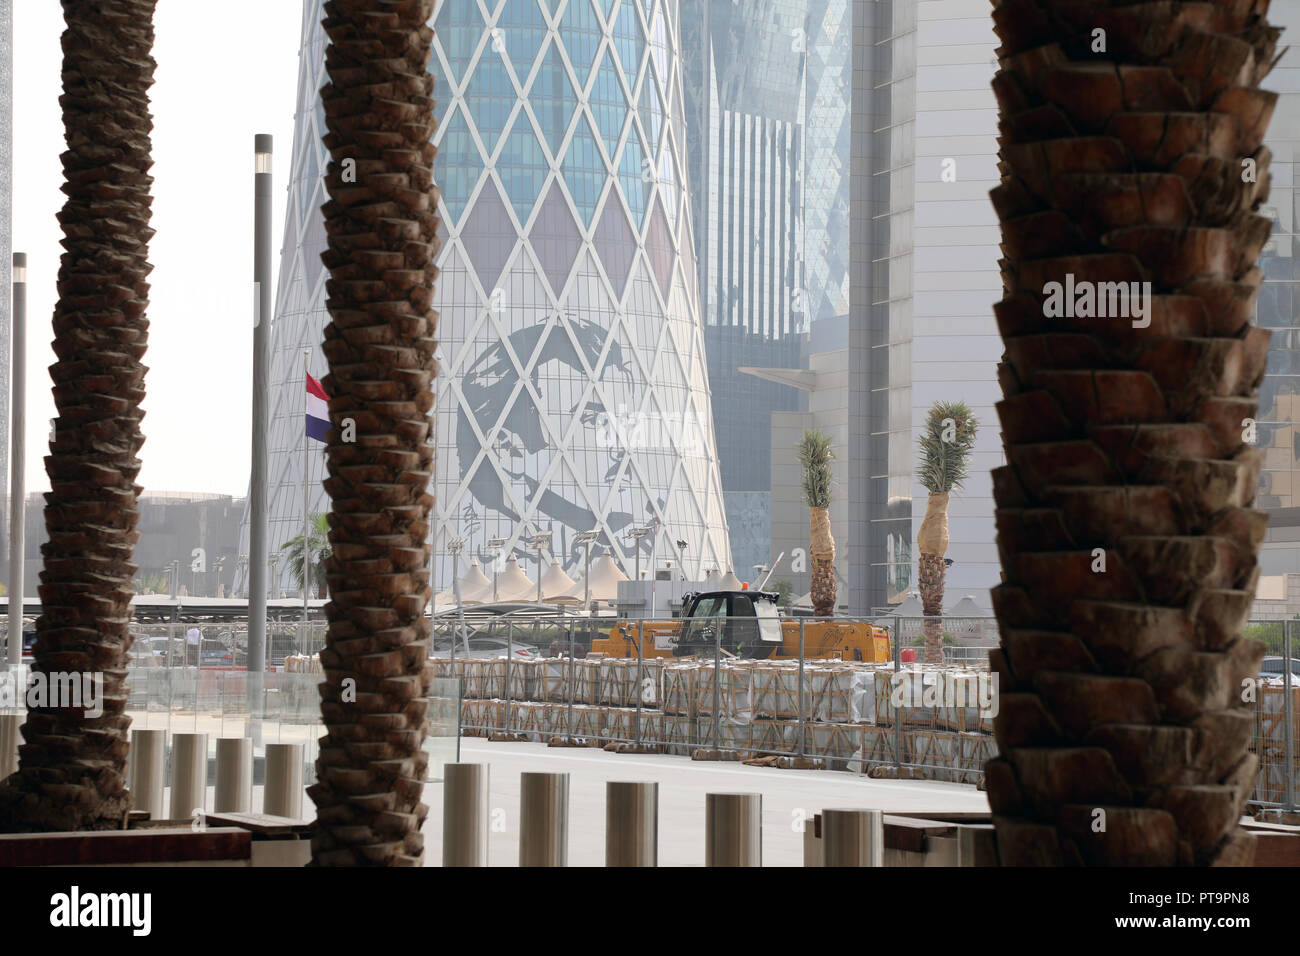 Doha / Qatar – October 8, 2018: A styalised image of Sheikh Tamim bin Hamad al Thani created by Ahmed Almaadheed on the side of a building in central Doha Credit: Dominic Dudley/Alamy Live News Stock Photo